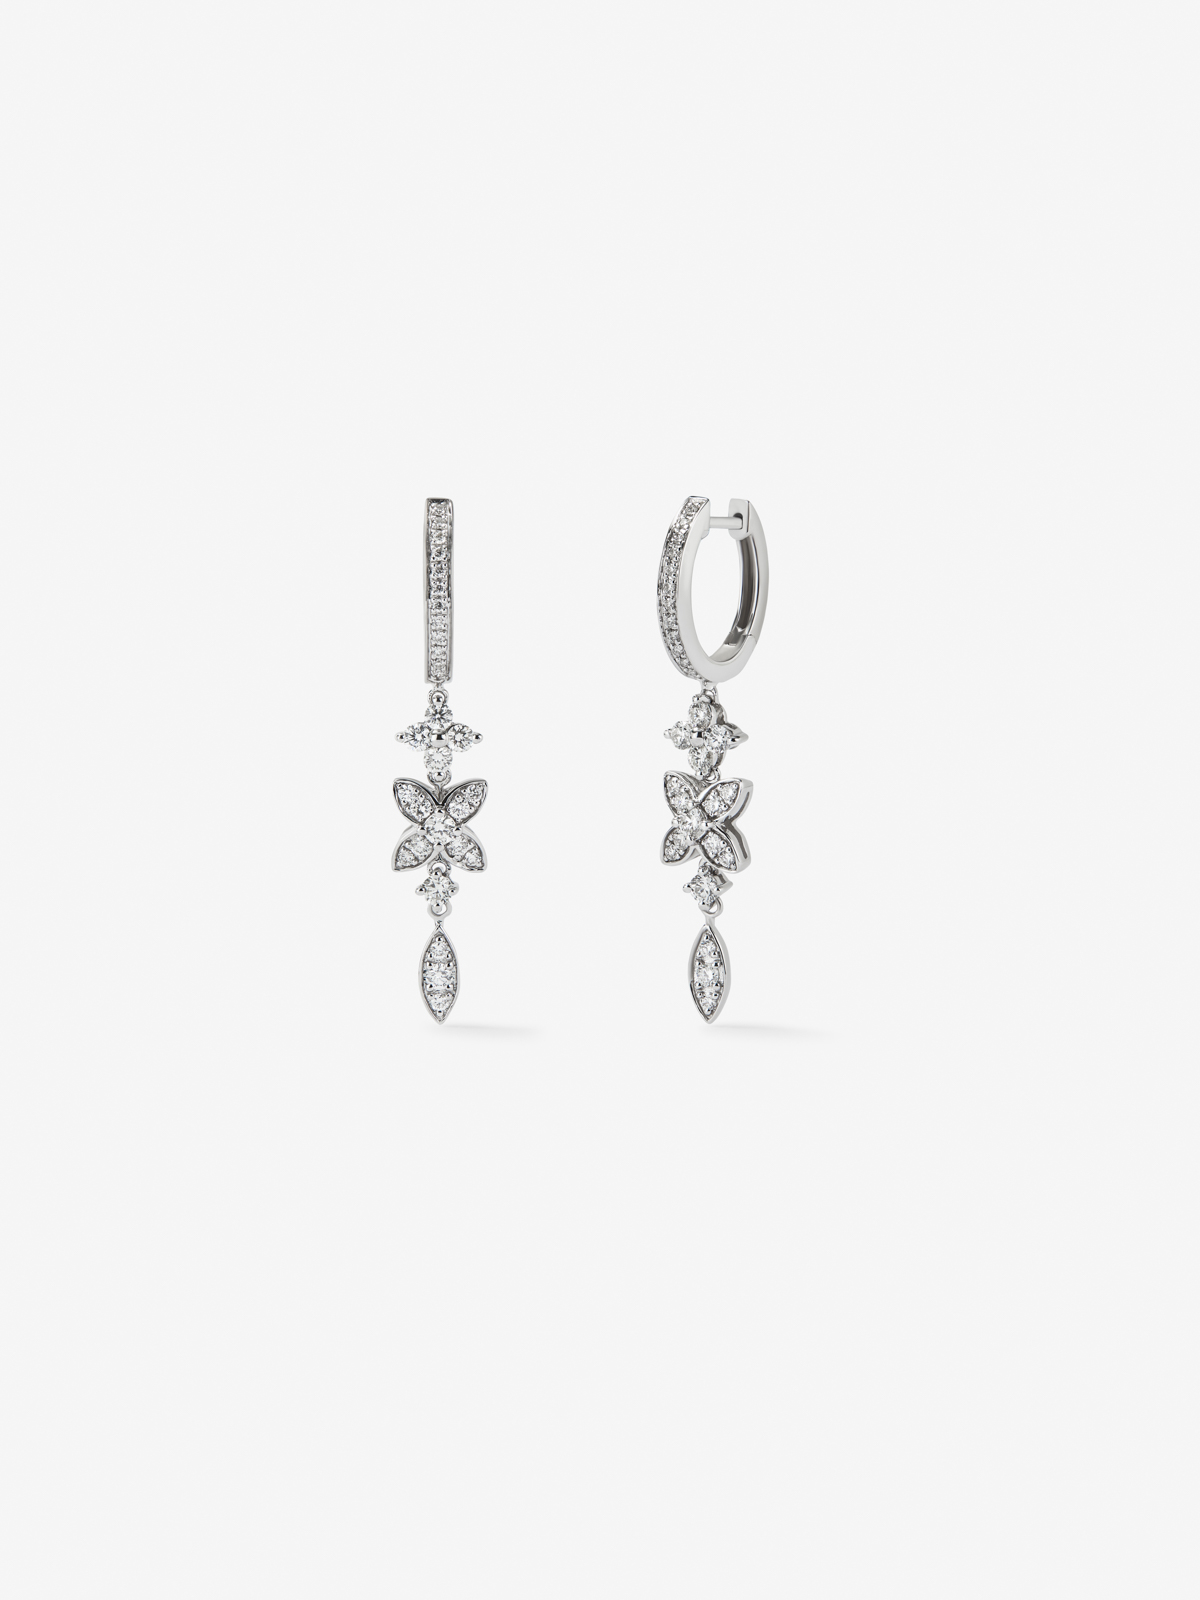 18K white gold earrings with 0.76 ct brilliant cut diamonds